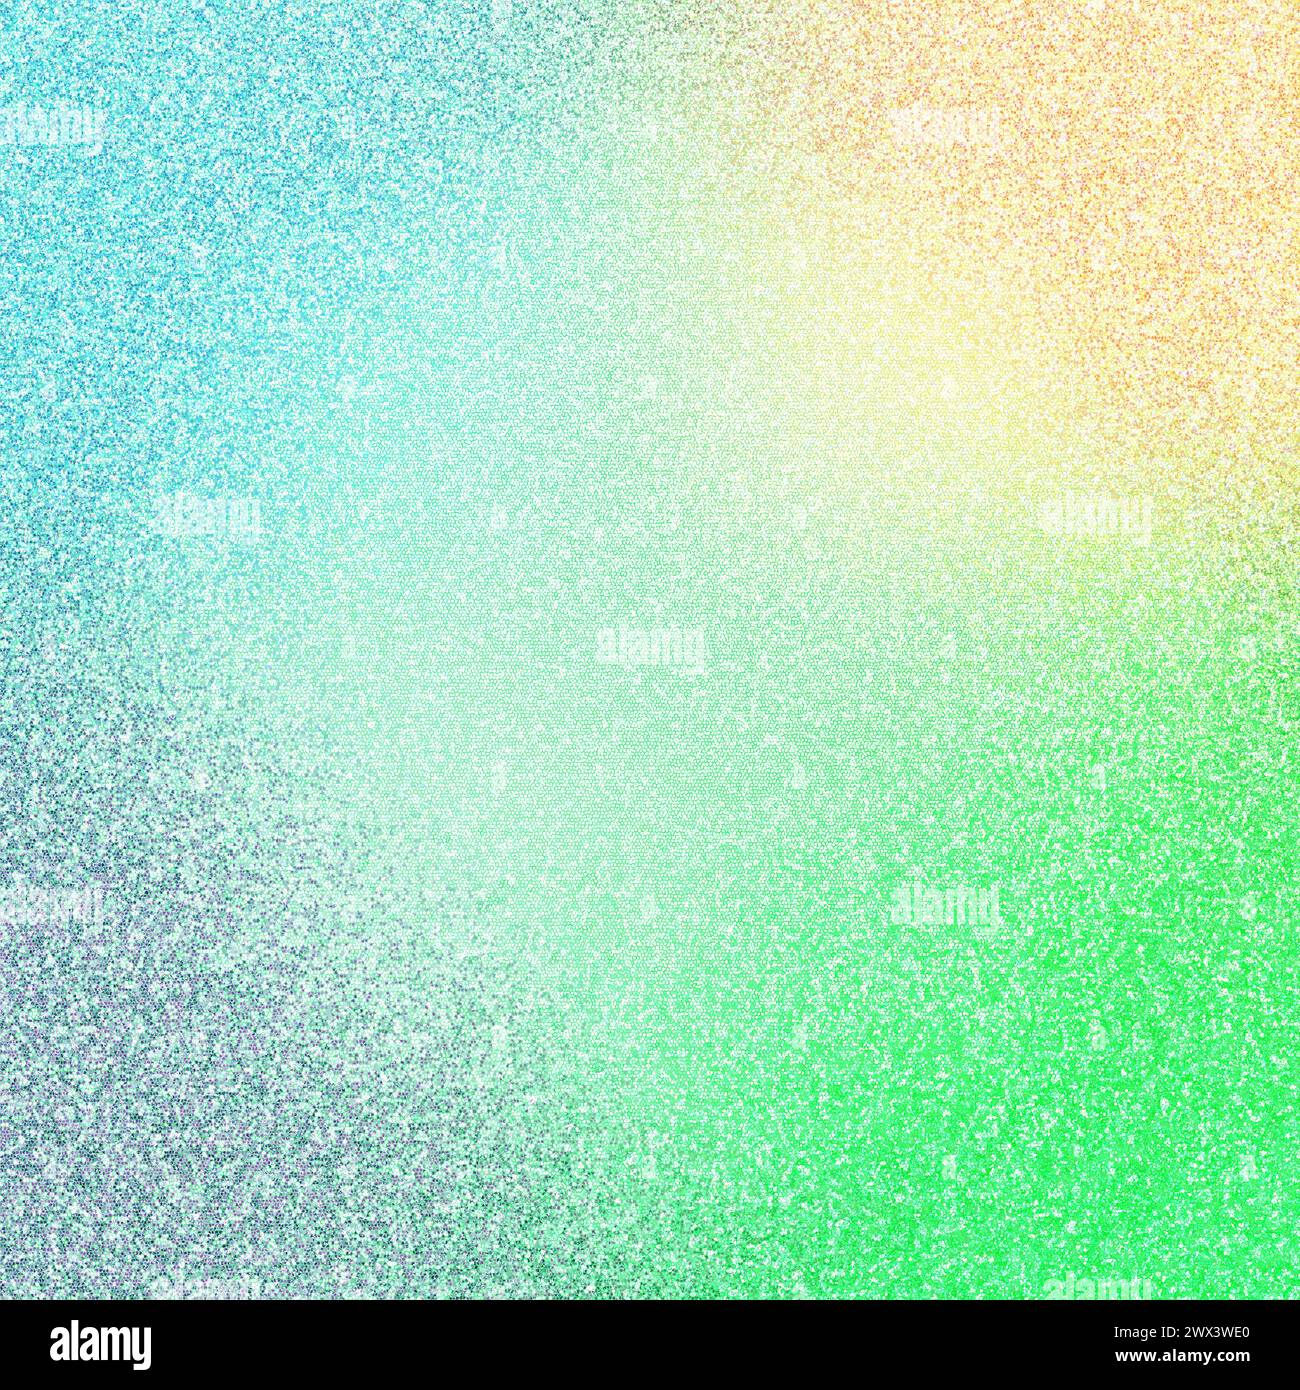 An abstract iridescent grainy grunge texture background image. Stock Photo